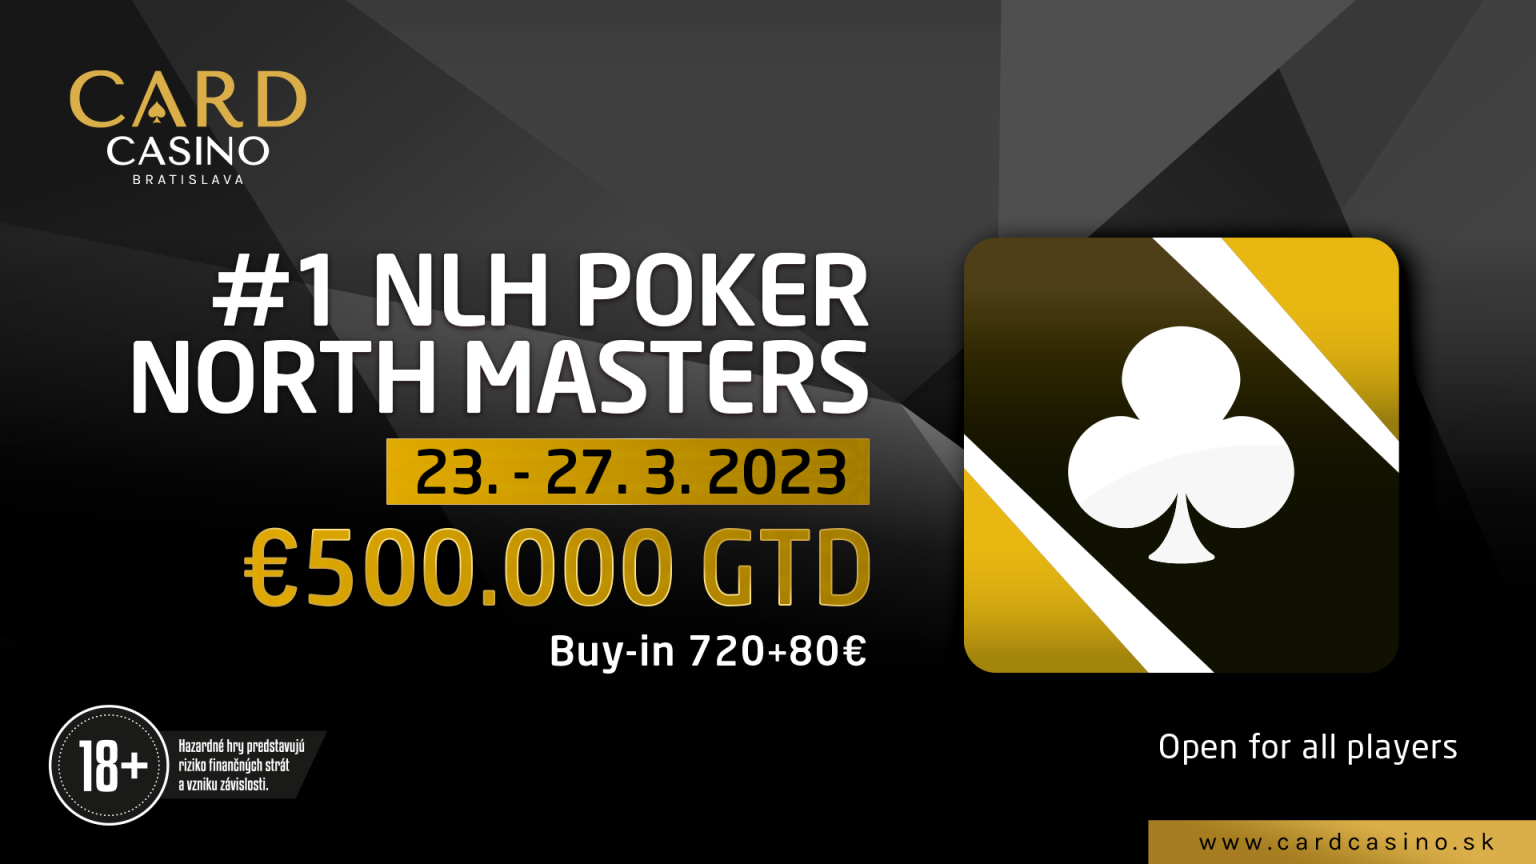 The tournament with the biggest guarantee is coming up. The €500,000 POKER NORTH MASTER will be played in Cardo!